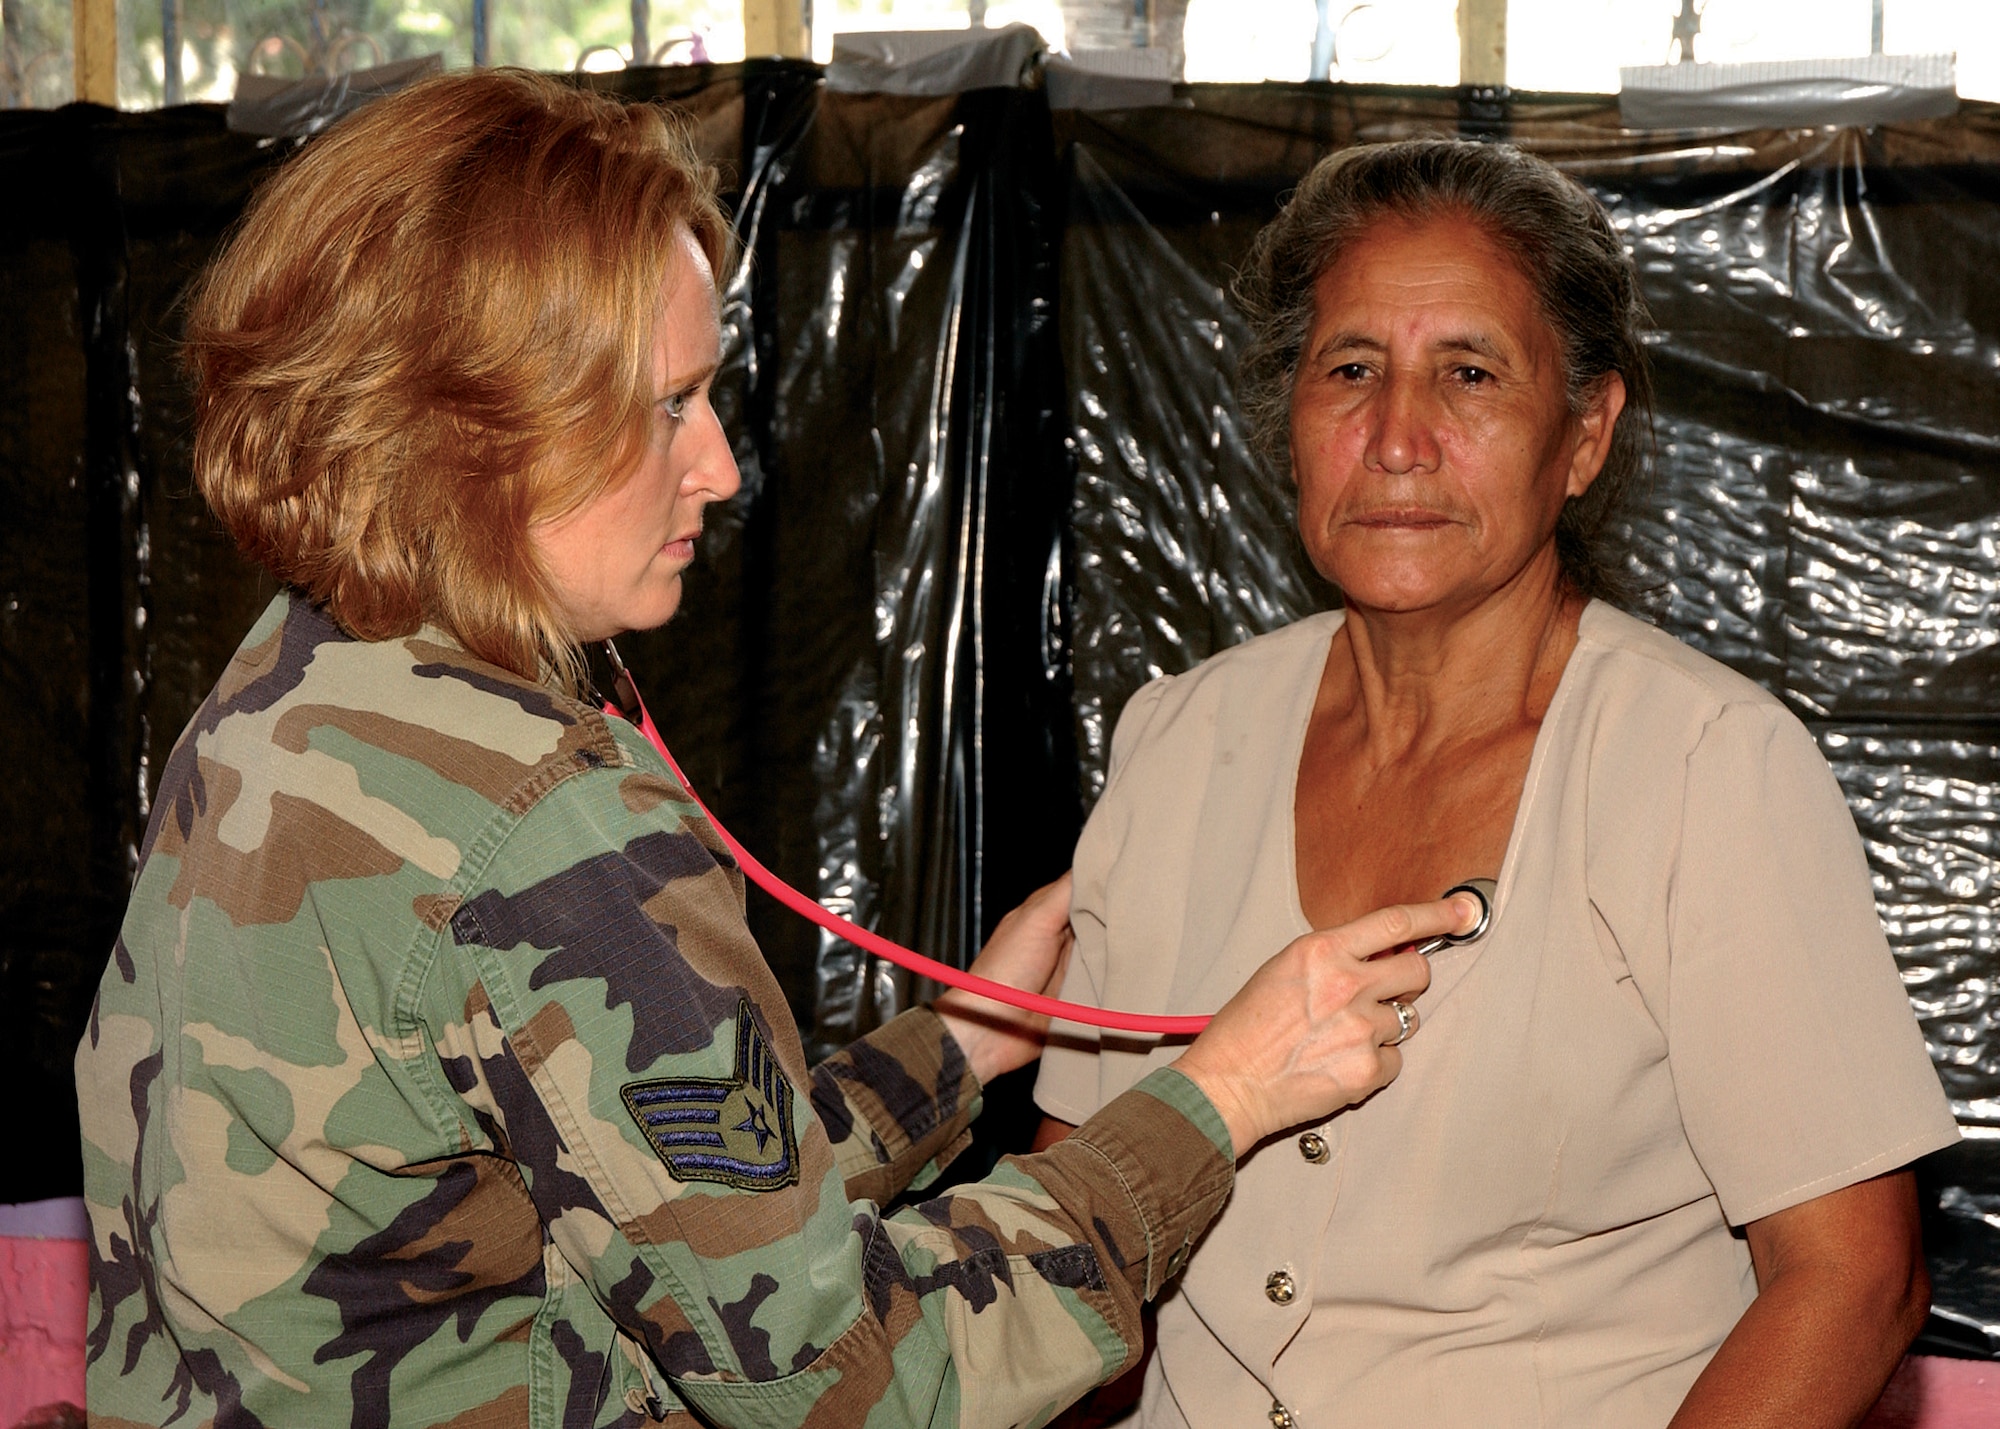 Staff Sgt. Paige Whitworth, 163d Medical Group medical technician, listens to a Guatemalan woman's heart. Sergeant Whitworth and 30 other members of the 163d Medical Group traveled to Guatemala Aug. 16-30 where they provided treatment for more than 5,700 people while visitng three of Santa Rosa's poorest communities. (U.S. Air Force photo by Capt Al Bosco, 163RW/PA)